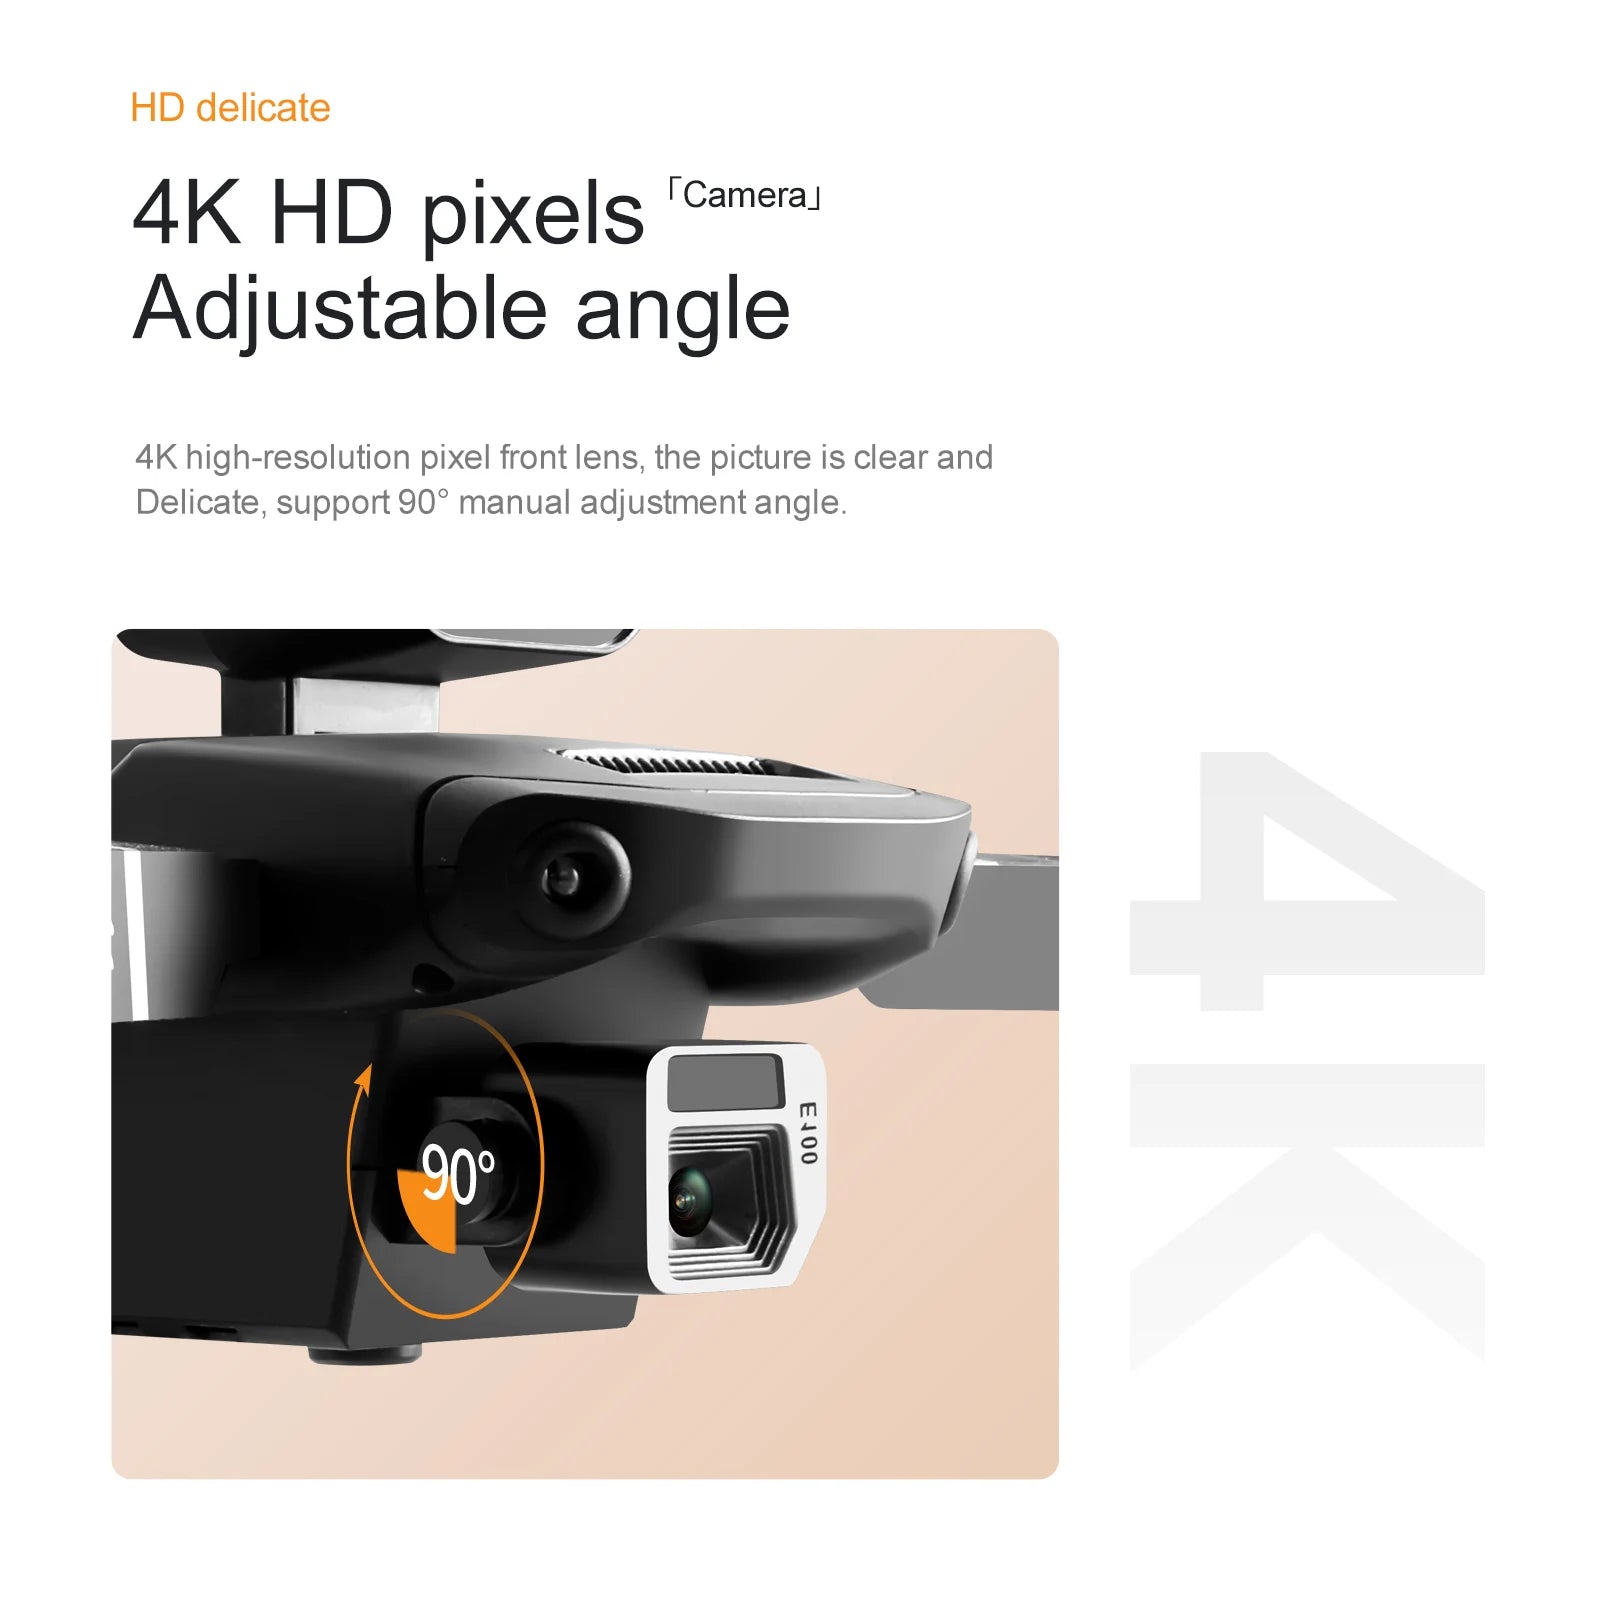 KBDFA E100 Mini Drone, the picture is clear and delicate, support 905 manual adjustment angle: